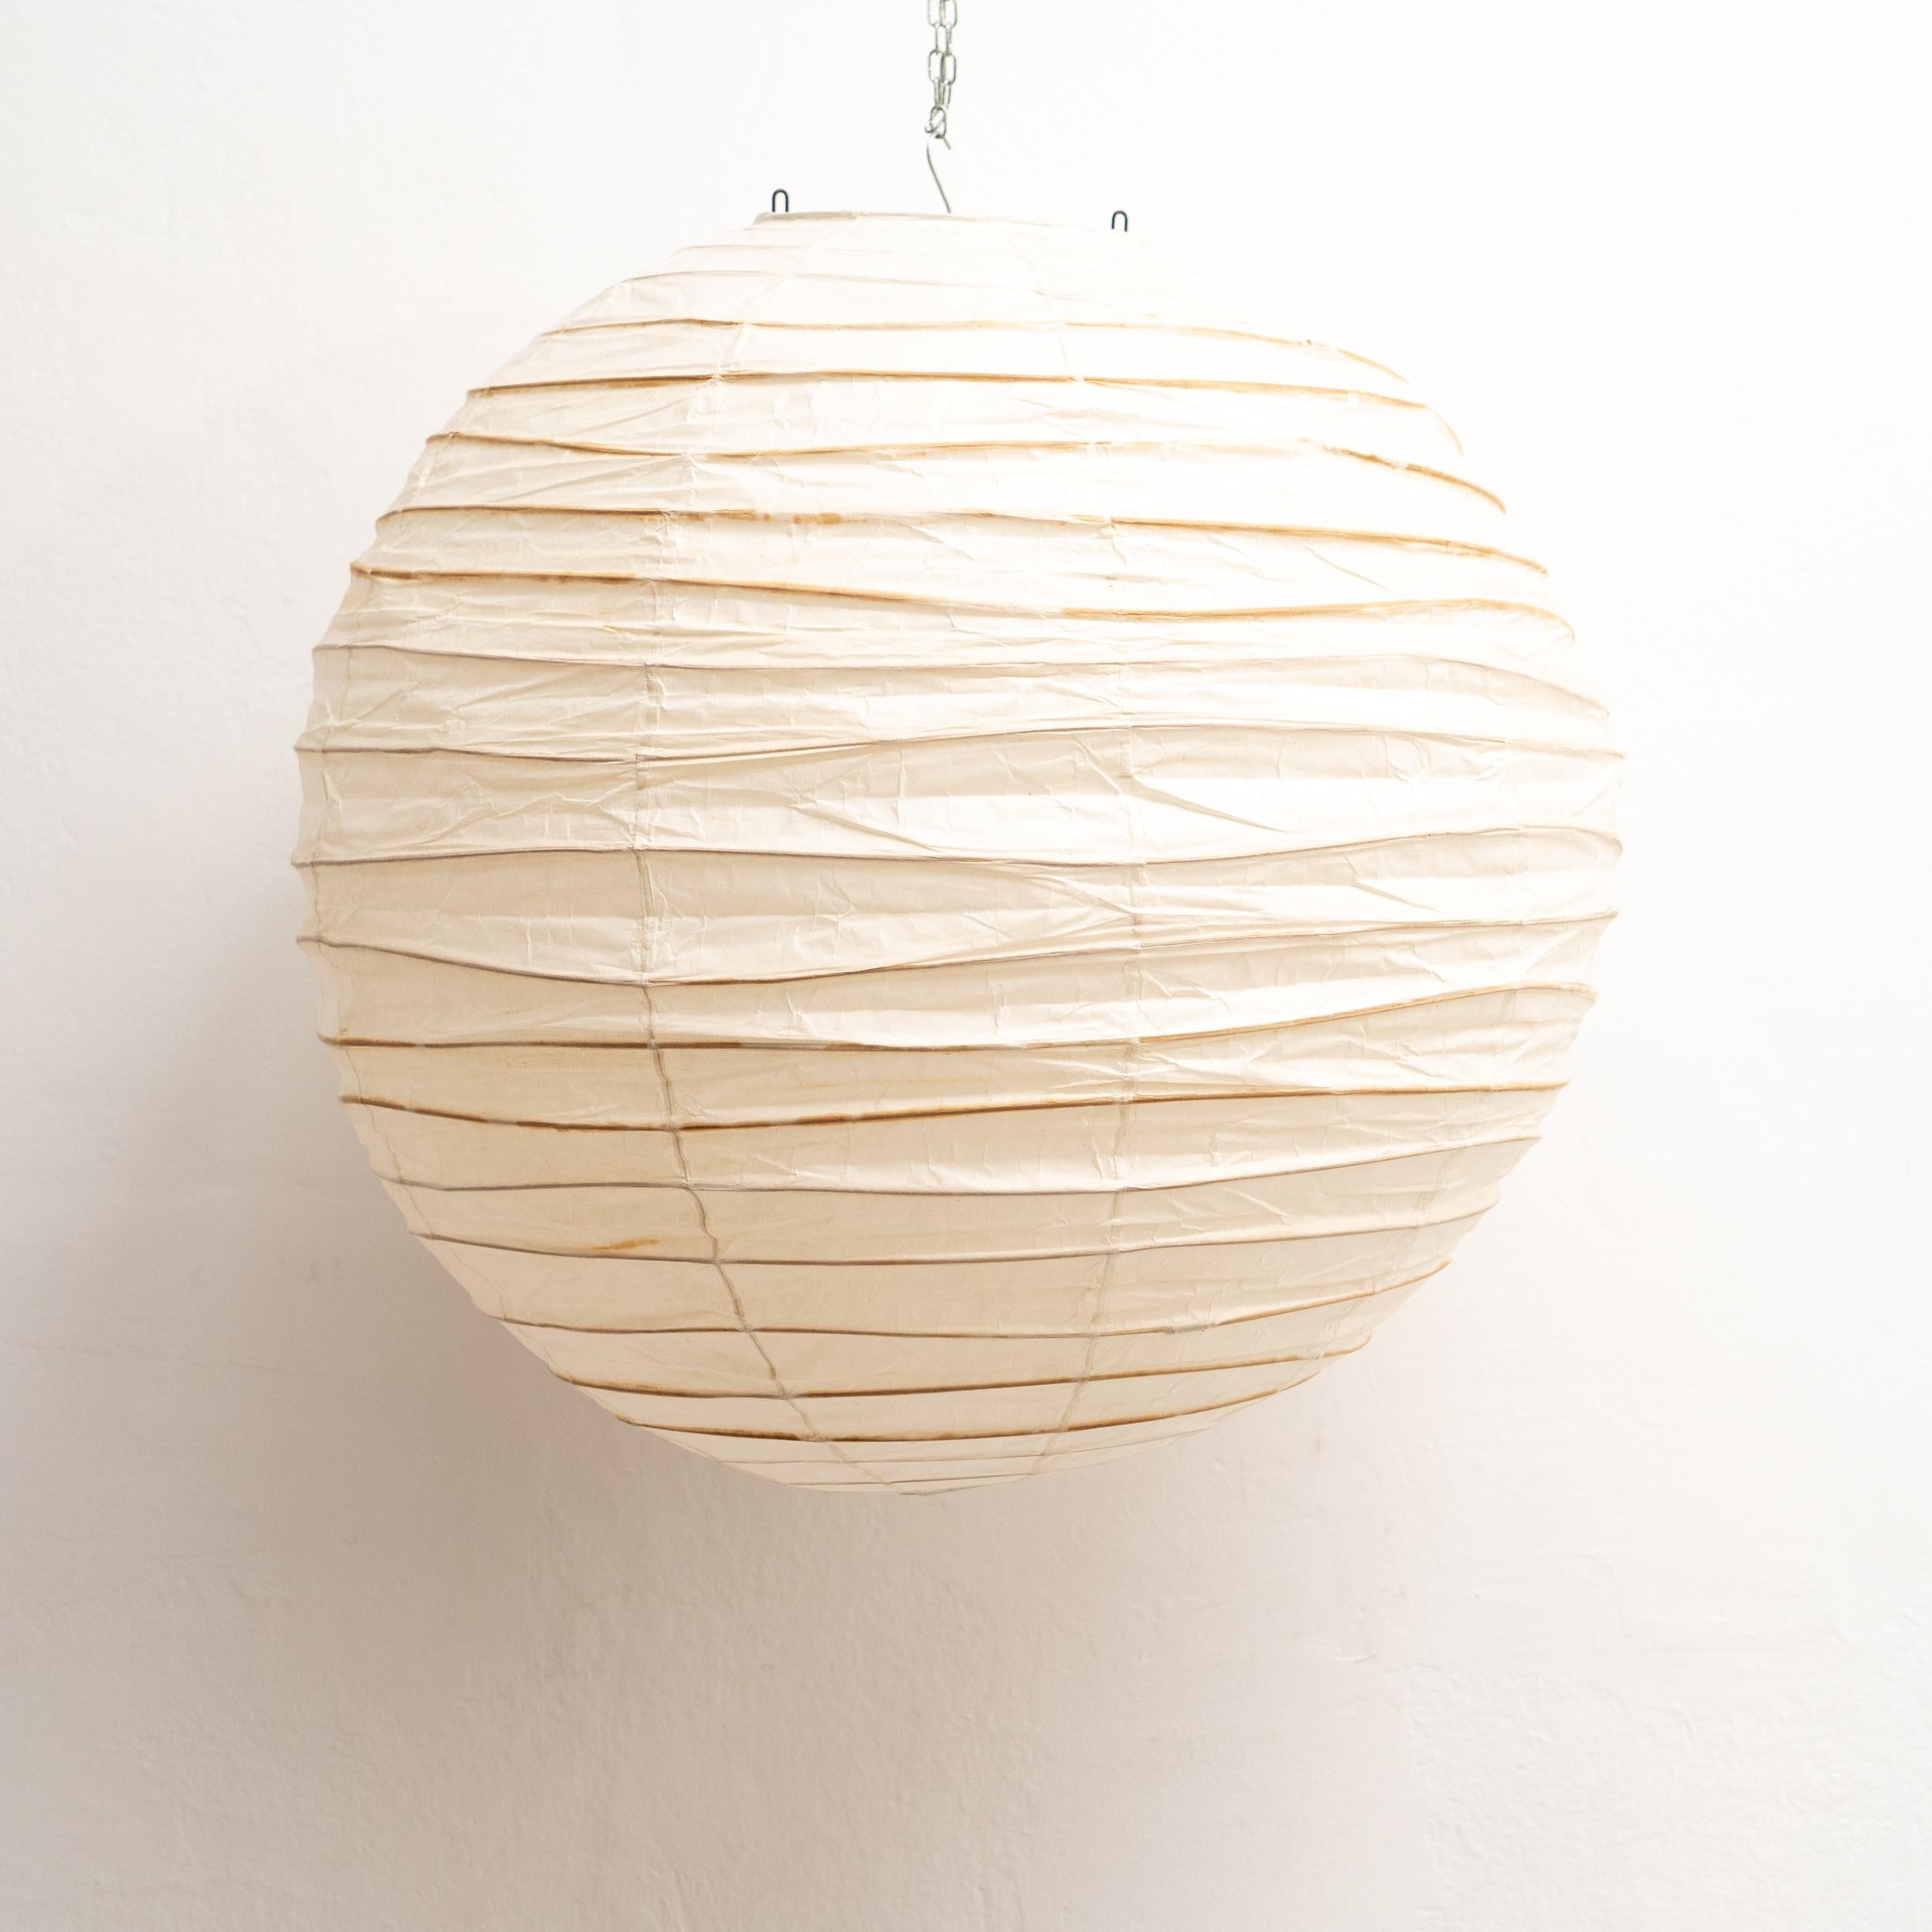 Discover the timeless allure of the Isamu Noguchi Akari Lamp, model 75D, a pendant lamp designed around 1950 and manufactured by Ozeki & Co. Ltd. in Japan. This mid-century modern masterpiece features a bamboo ribbing structure covered by washi